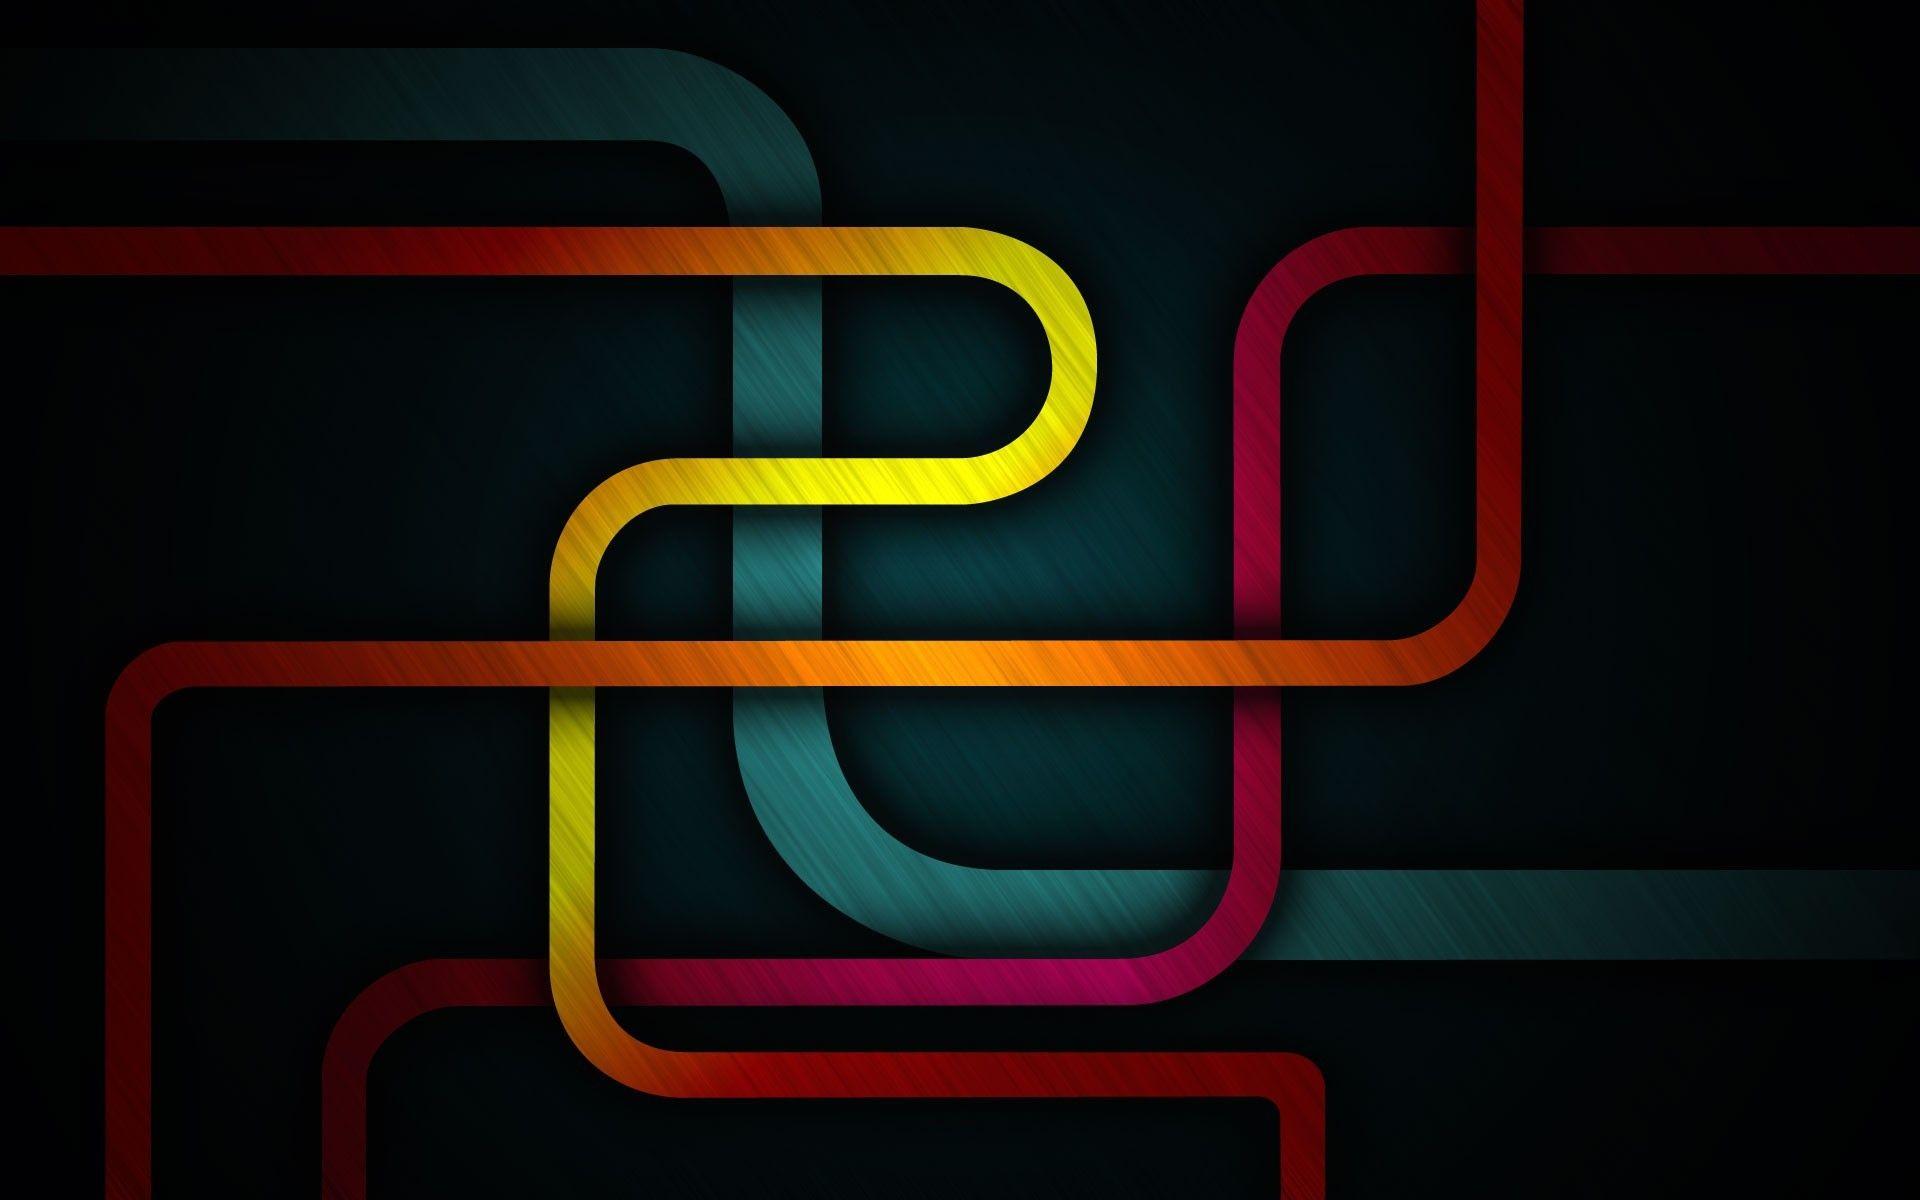 Pipe Backgrounds